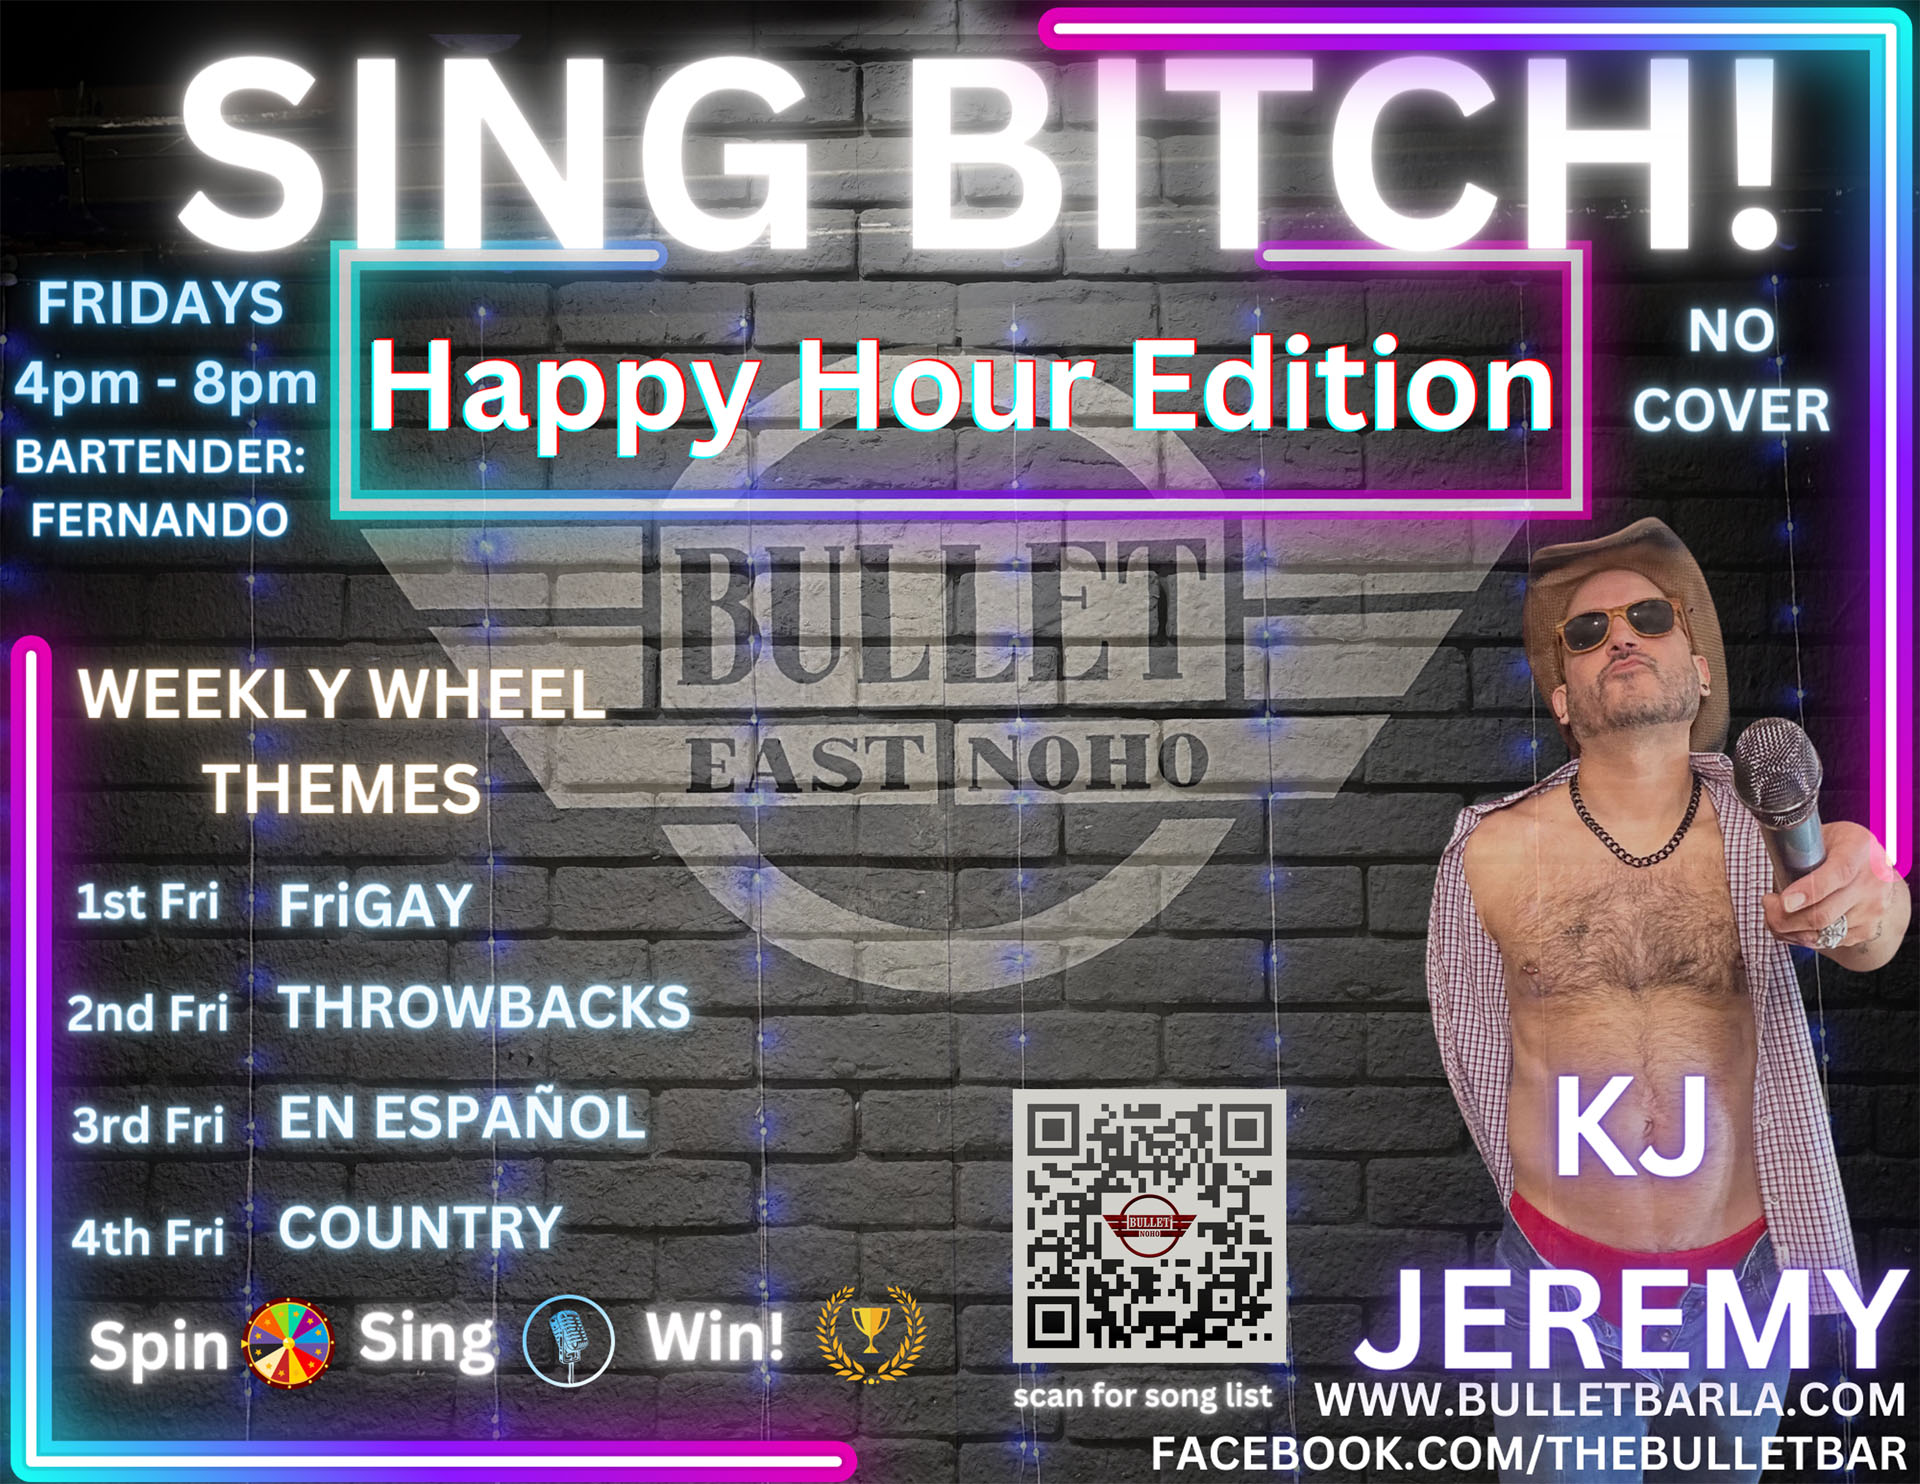 The Bullet Bar presents SING BITCH! KARAOKE FRIDAY EDITION Hosted by KJ Jeremy: Fridays from 4:00 PM to 8:00 PM! No cover.